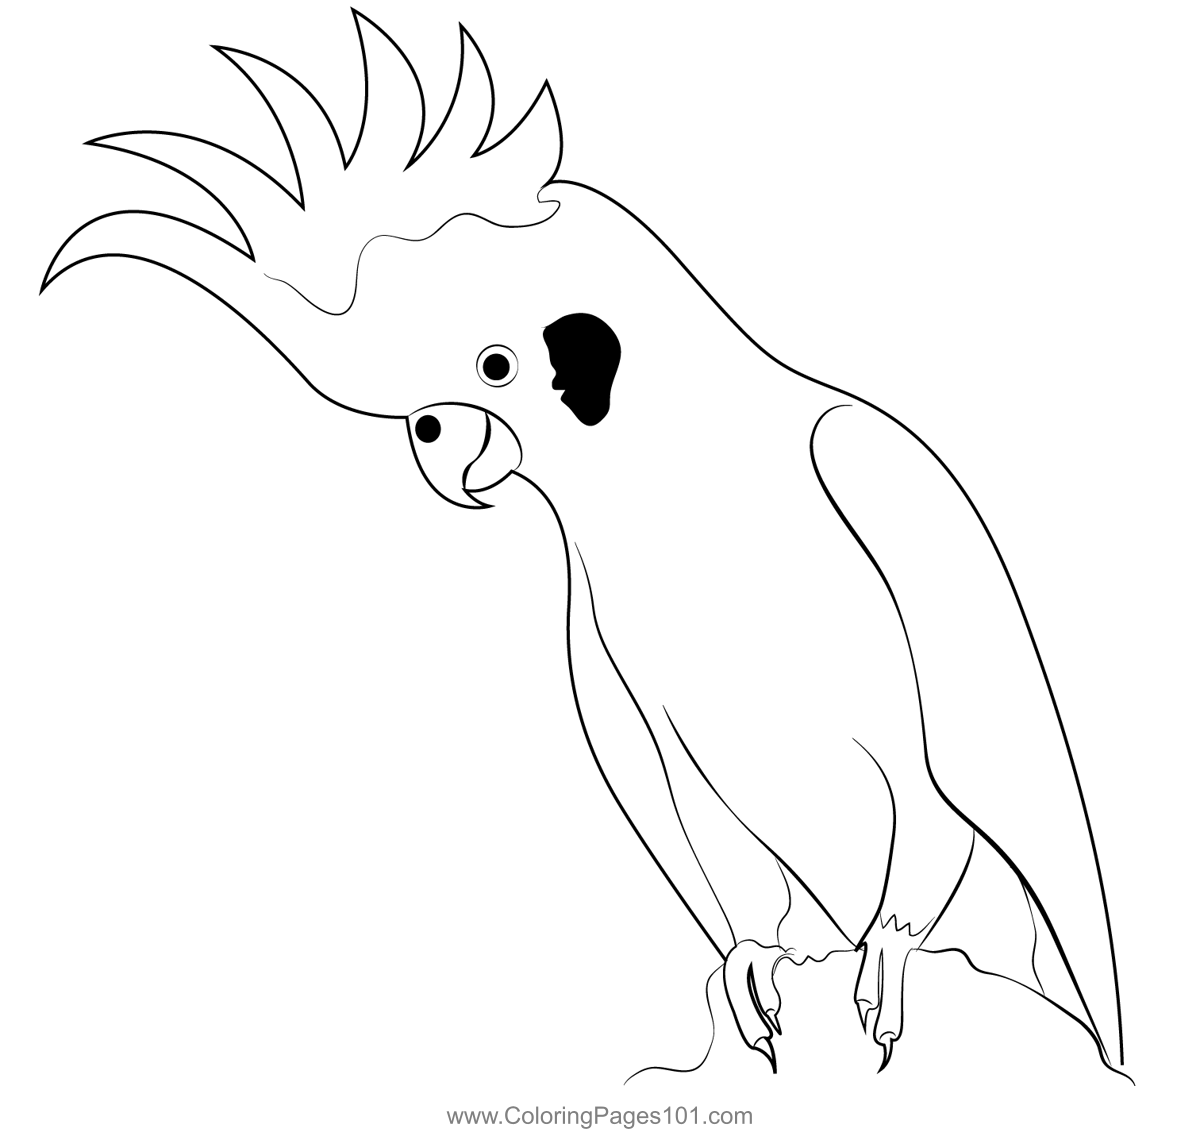 Cockatoo Cage Coloring Page for Kids - Free Parrots Printable Coloring ...